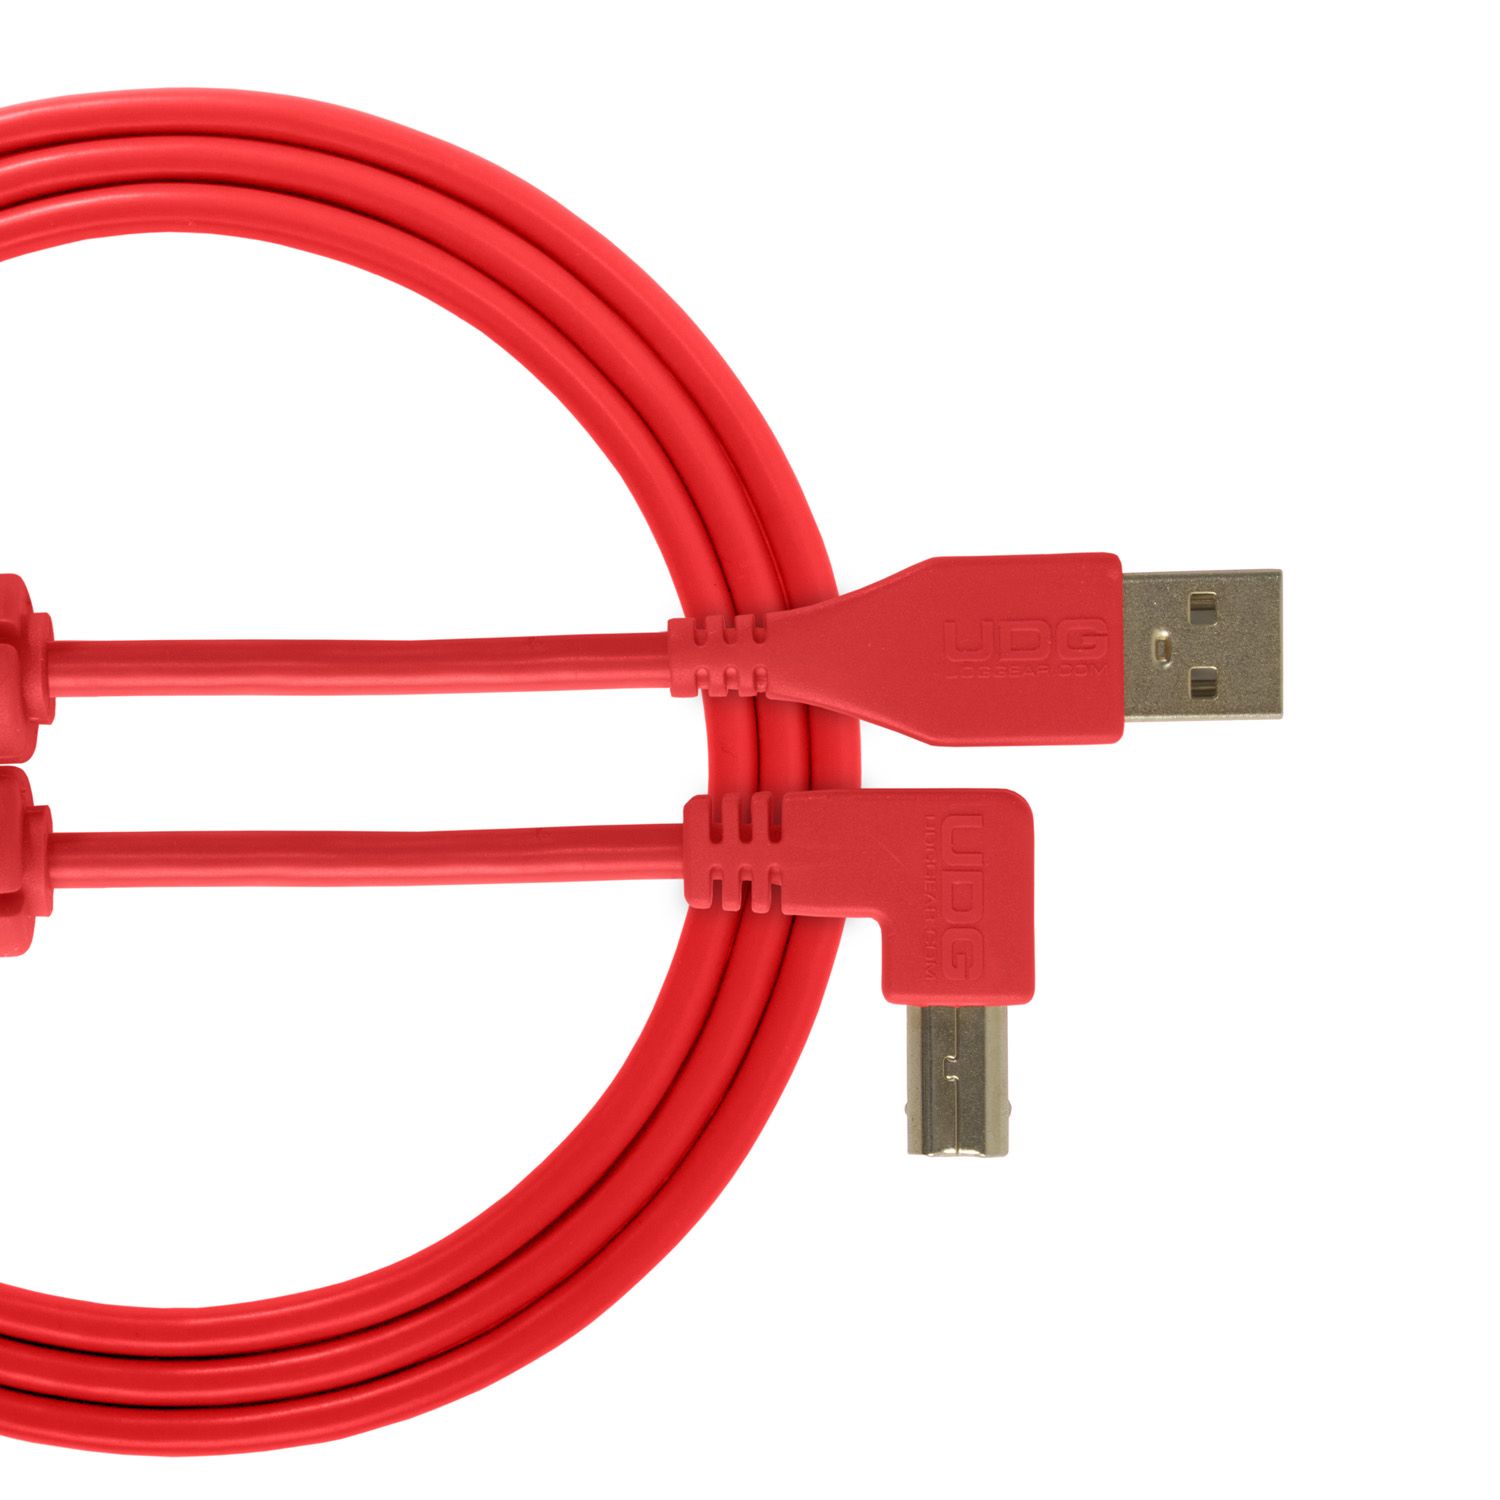 U95006RD UDG AUDIO CABLE USB 2.0 A-B RED ANGLED 3M